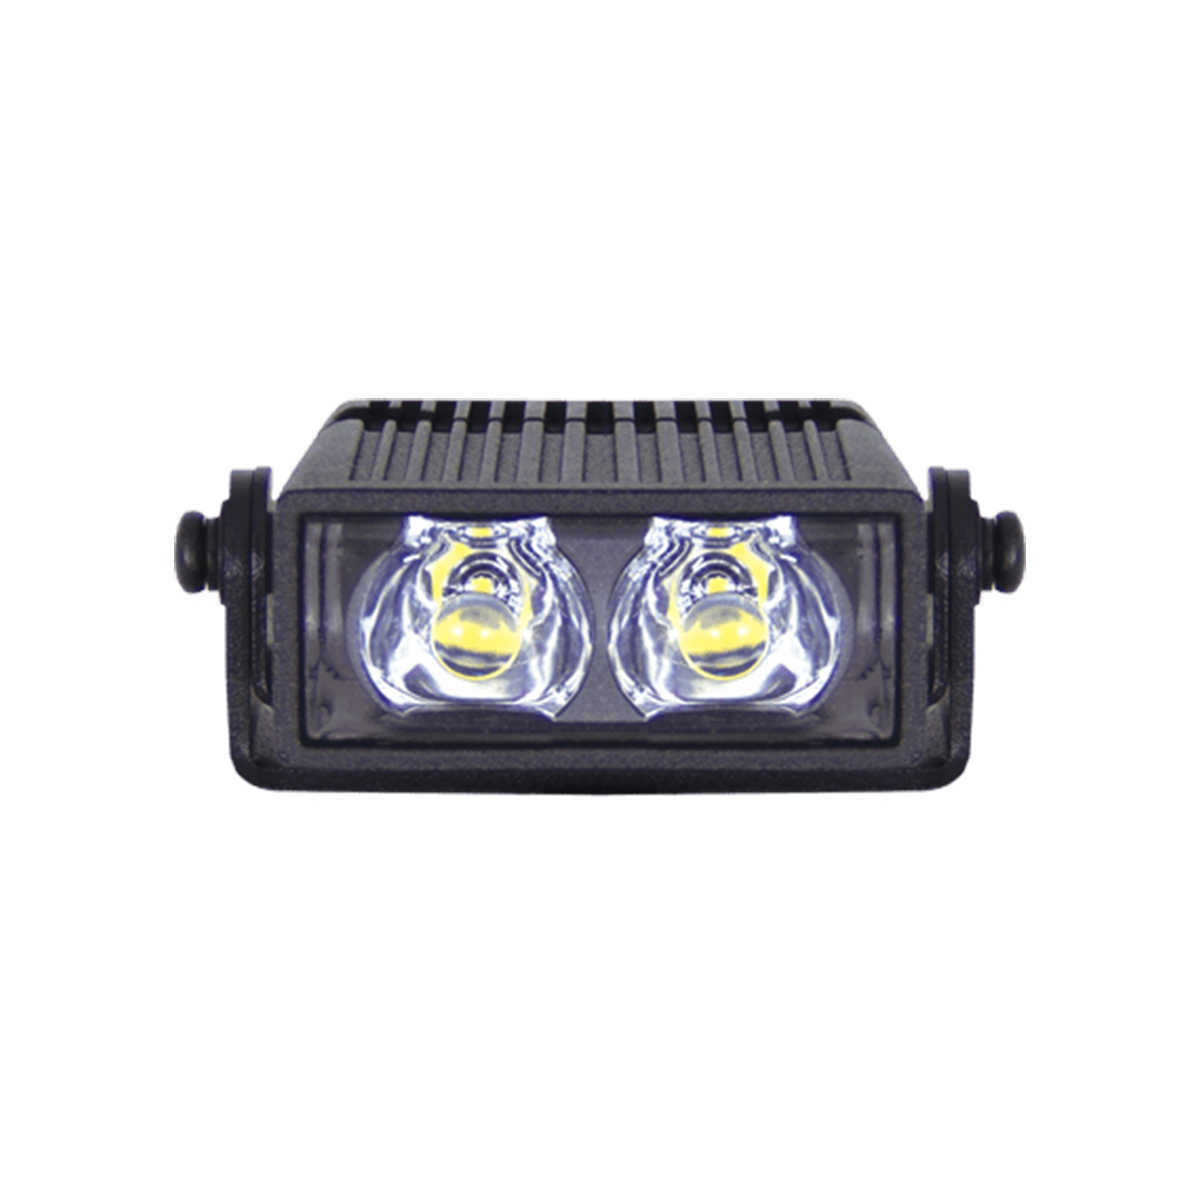 mpower® ORV 2x1 Silicone Light Kit with vehicle harness